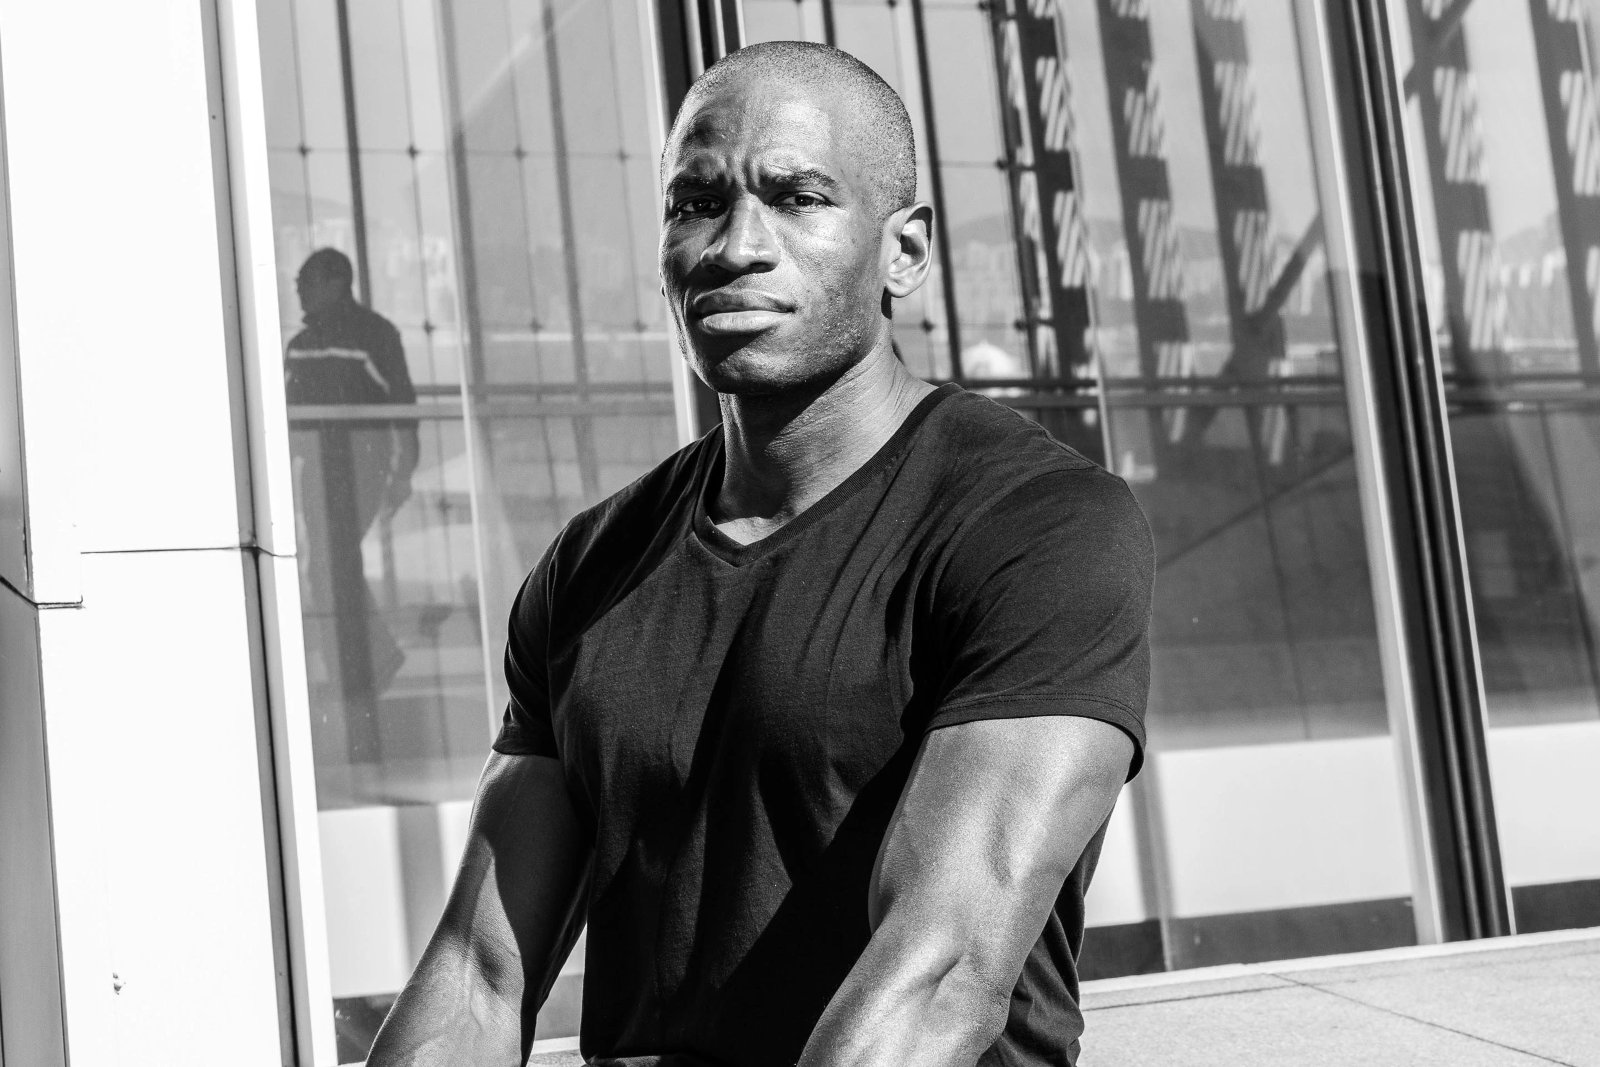 Bitmex's Arthur Hayes Requests Leniency, No Jail Time for Violating the US Bank Secrecy Act 10